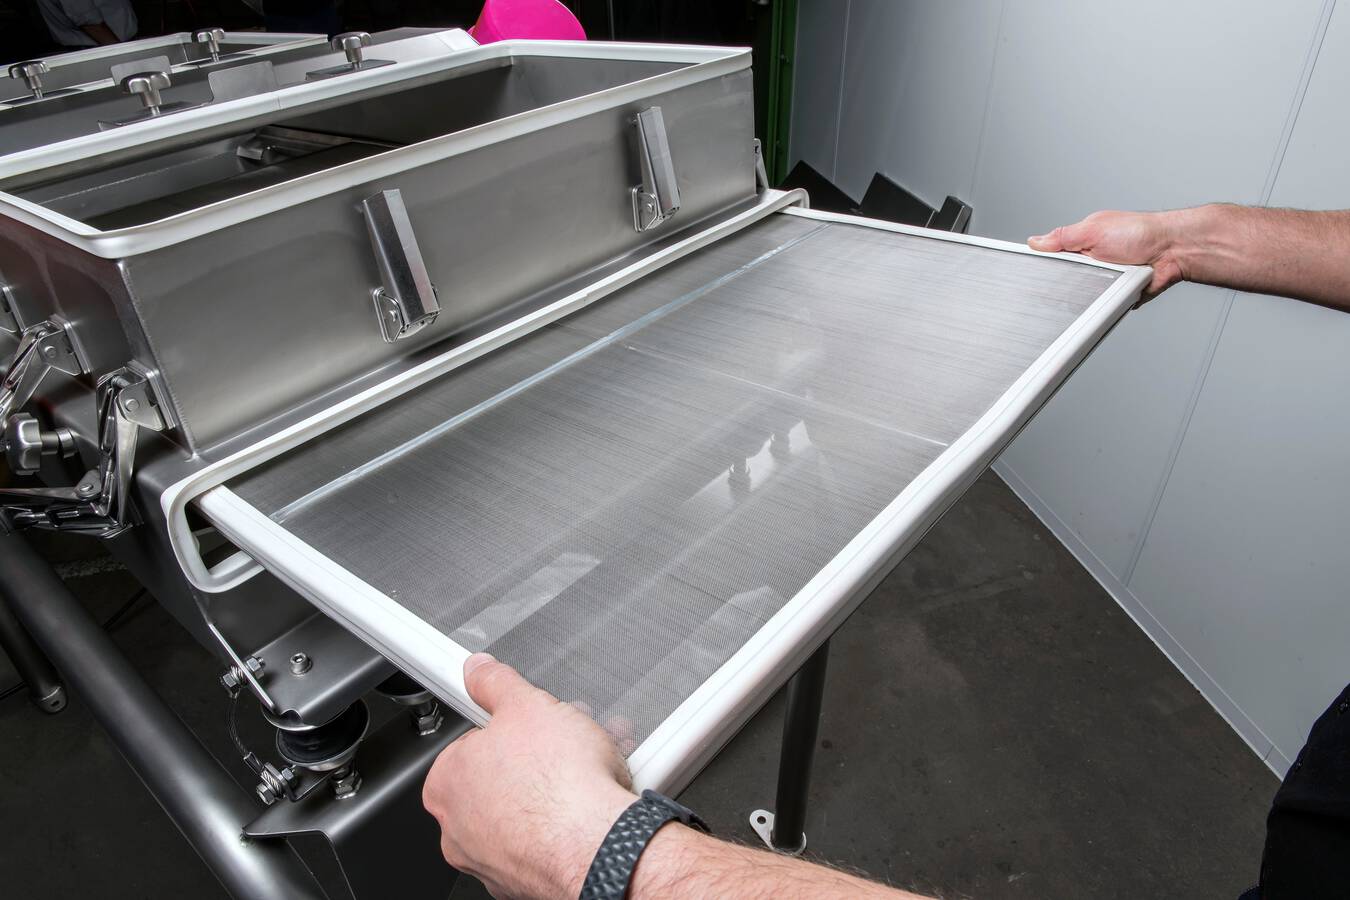 Thanks to the drawer principle, the removal of a screen insert takes no more than 30 seconds with the JEL Konti.